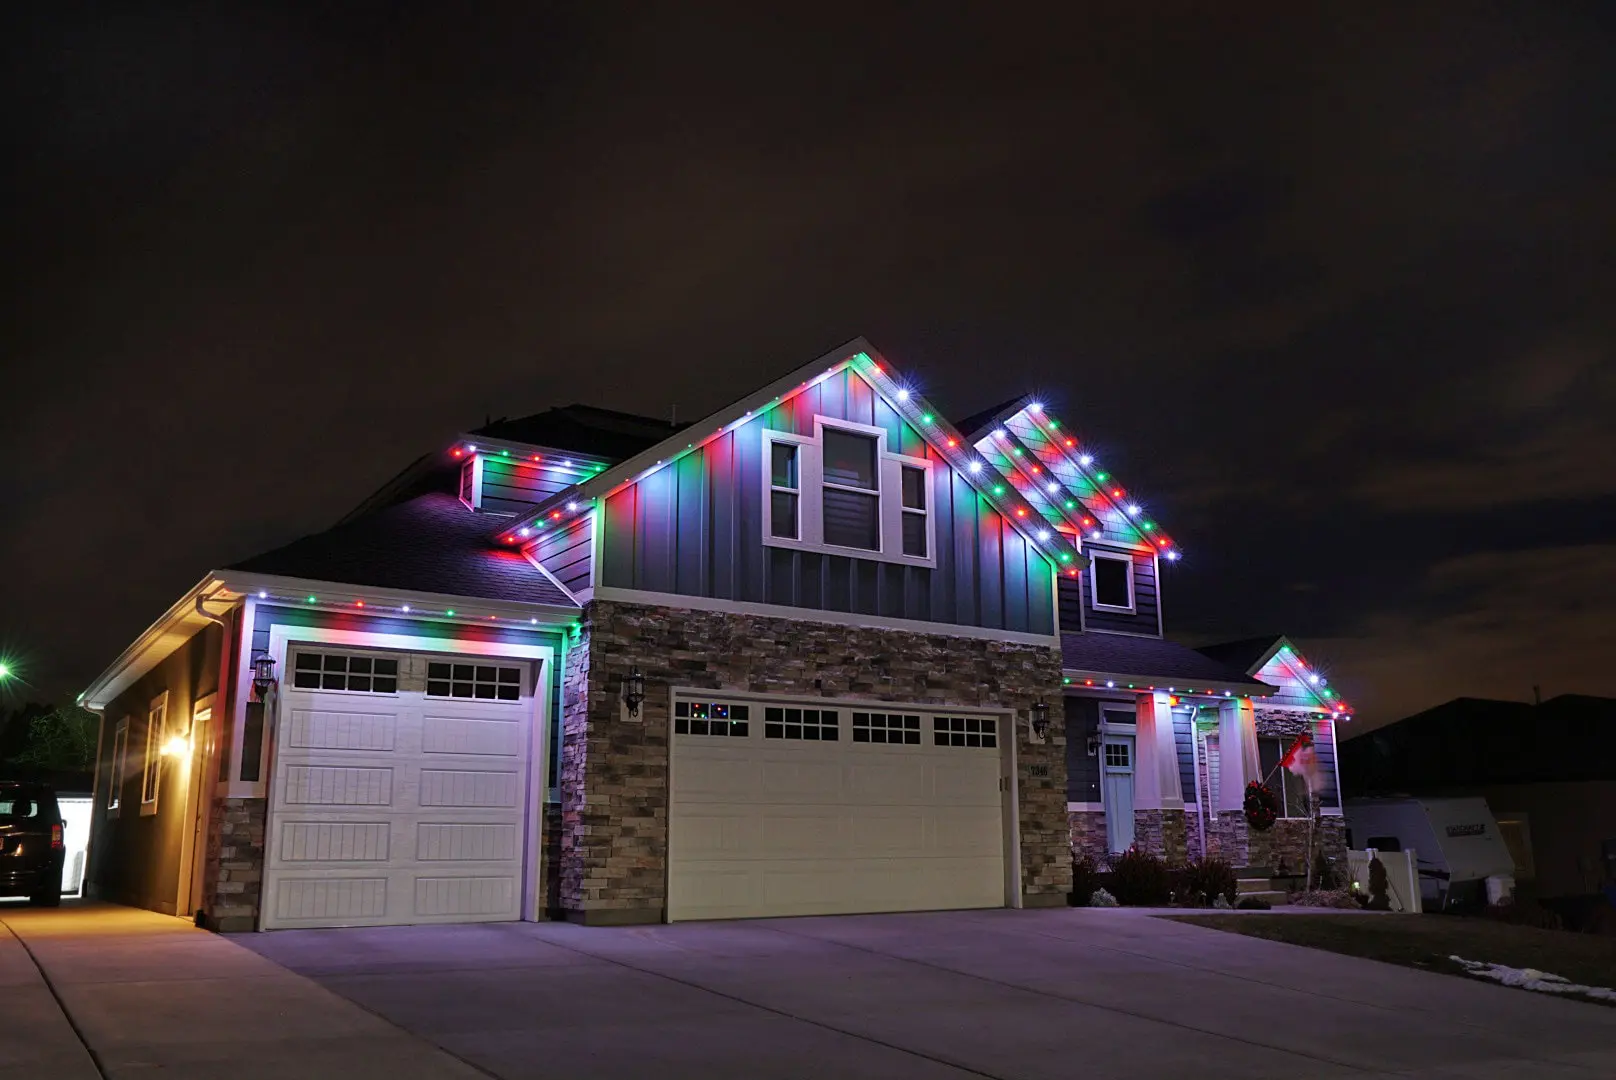 A beautiful lighting system for the holidays